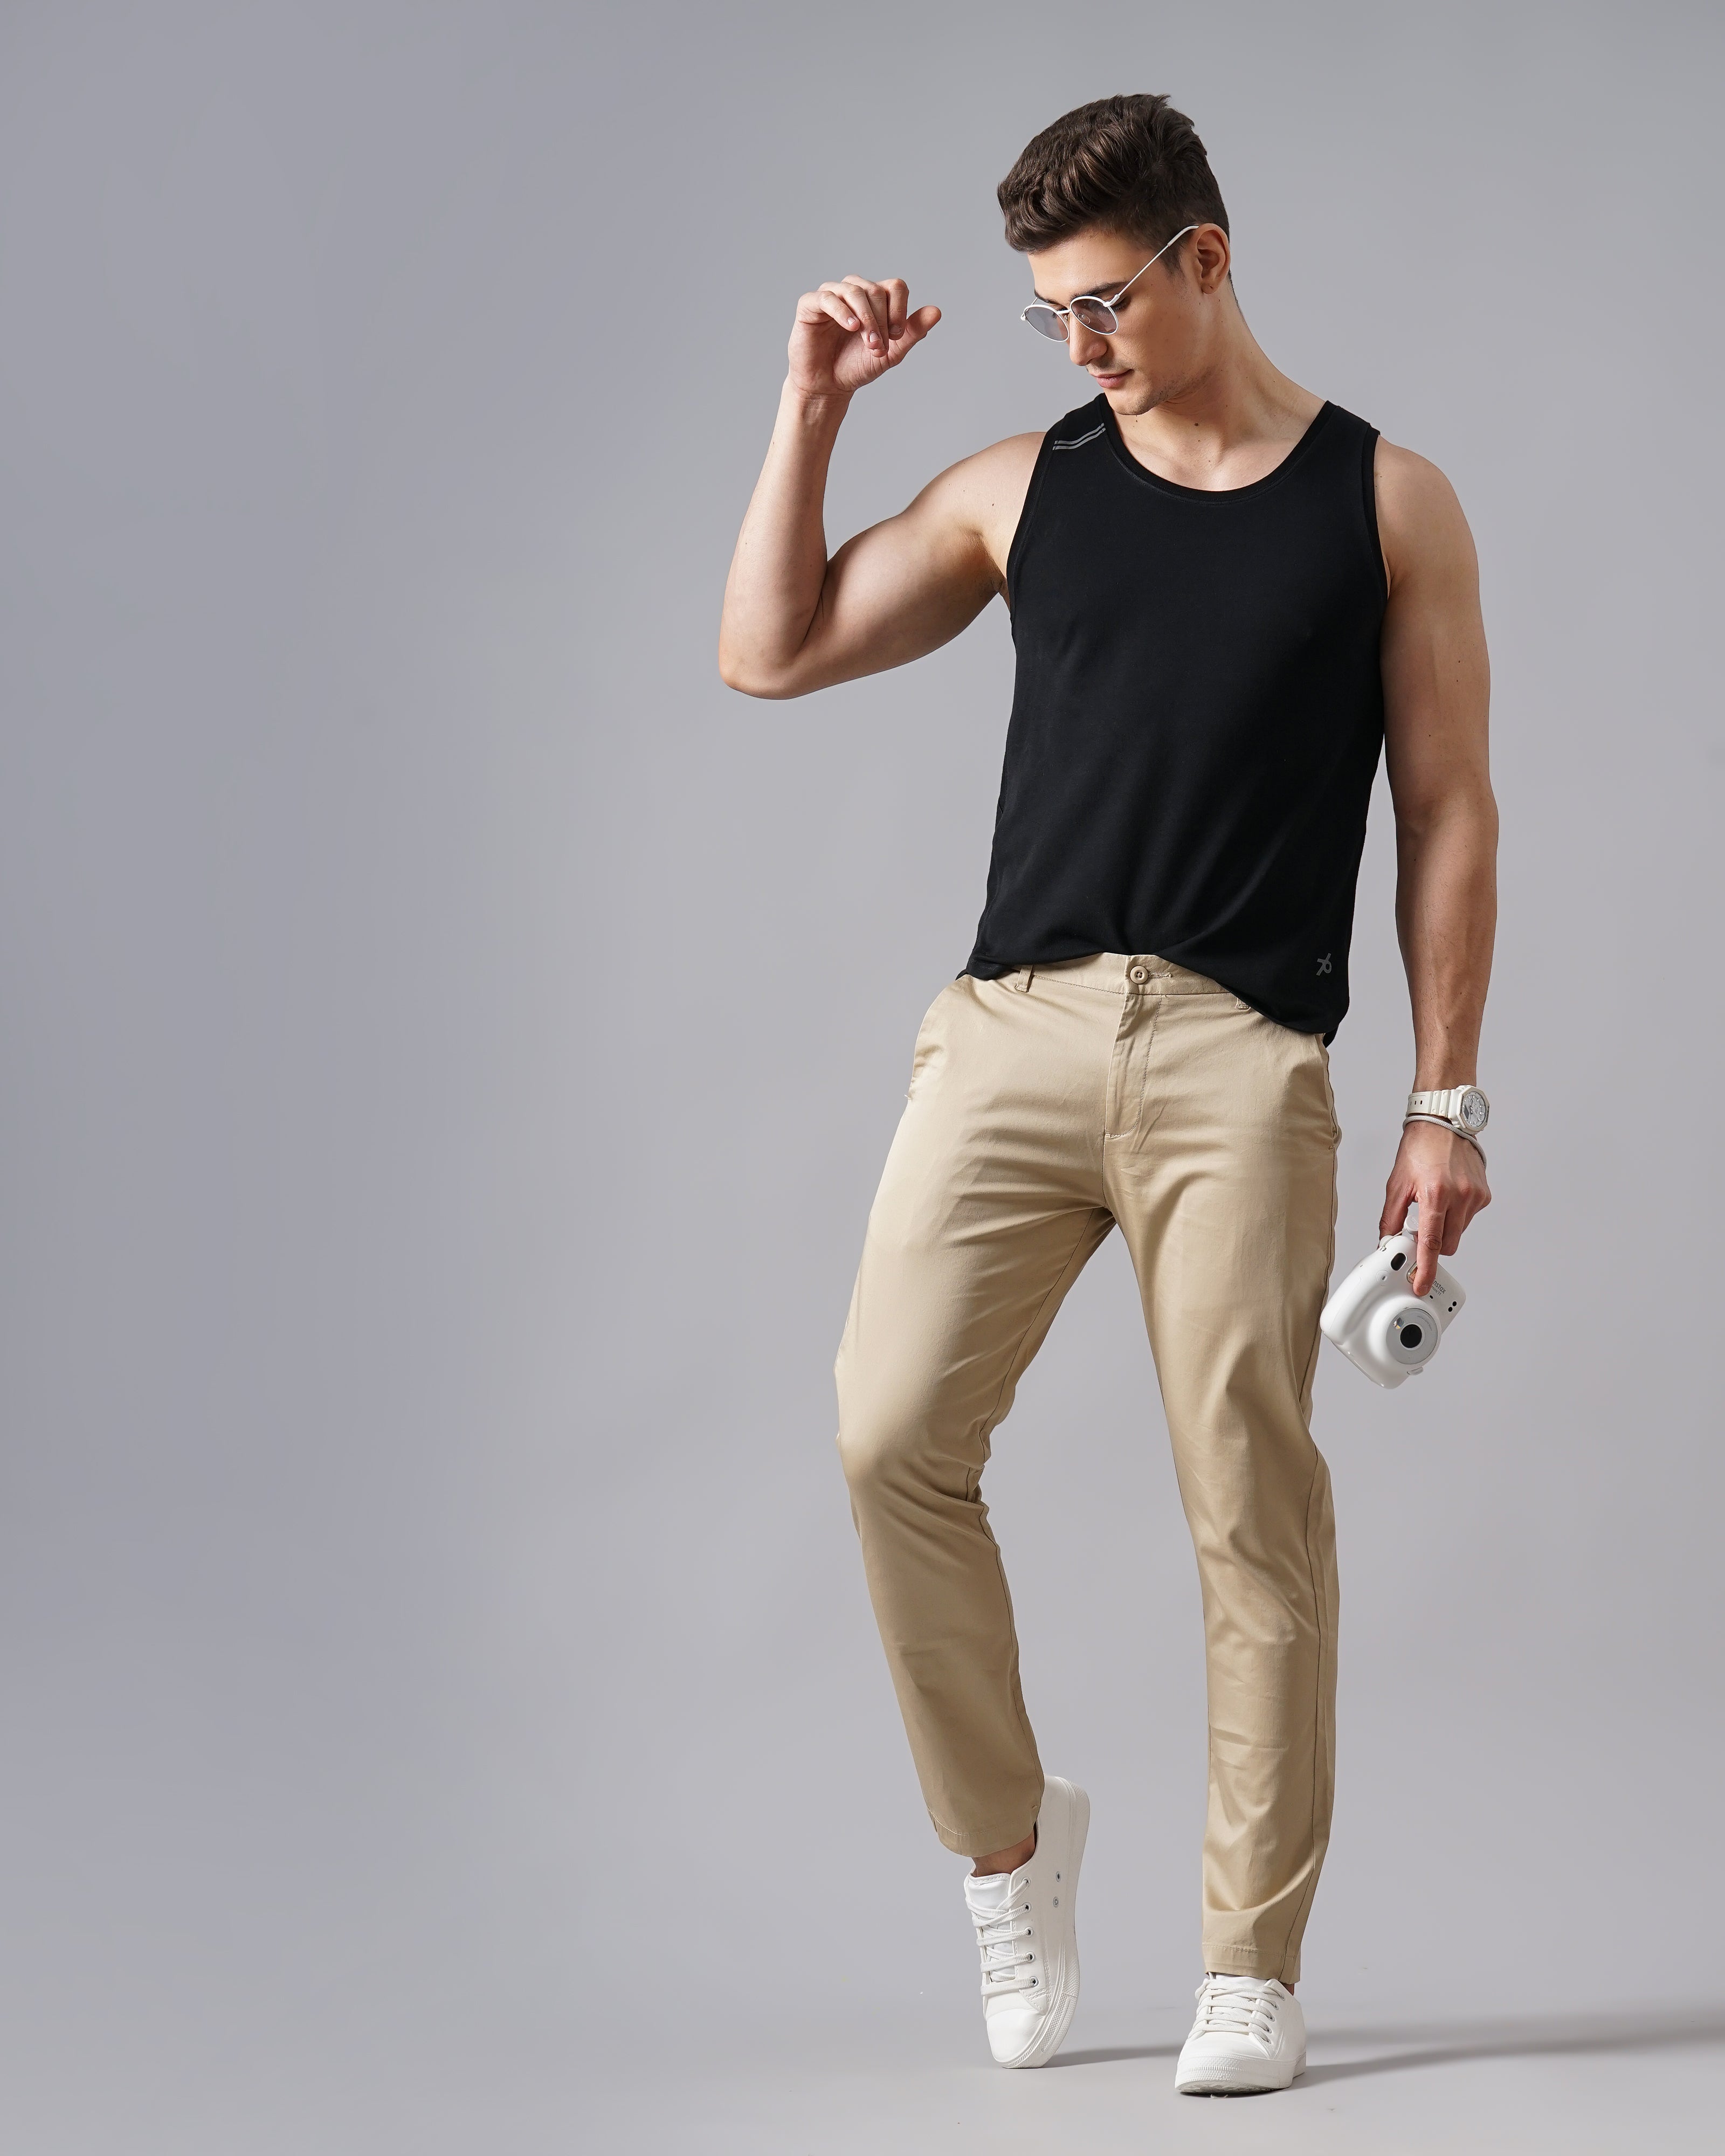 MEN'S CASUAL CHINOS